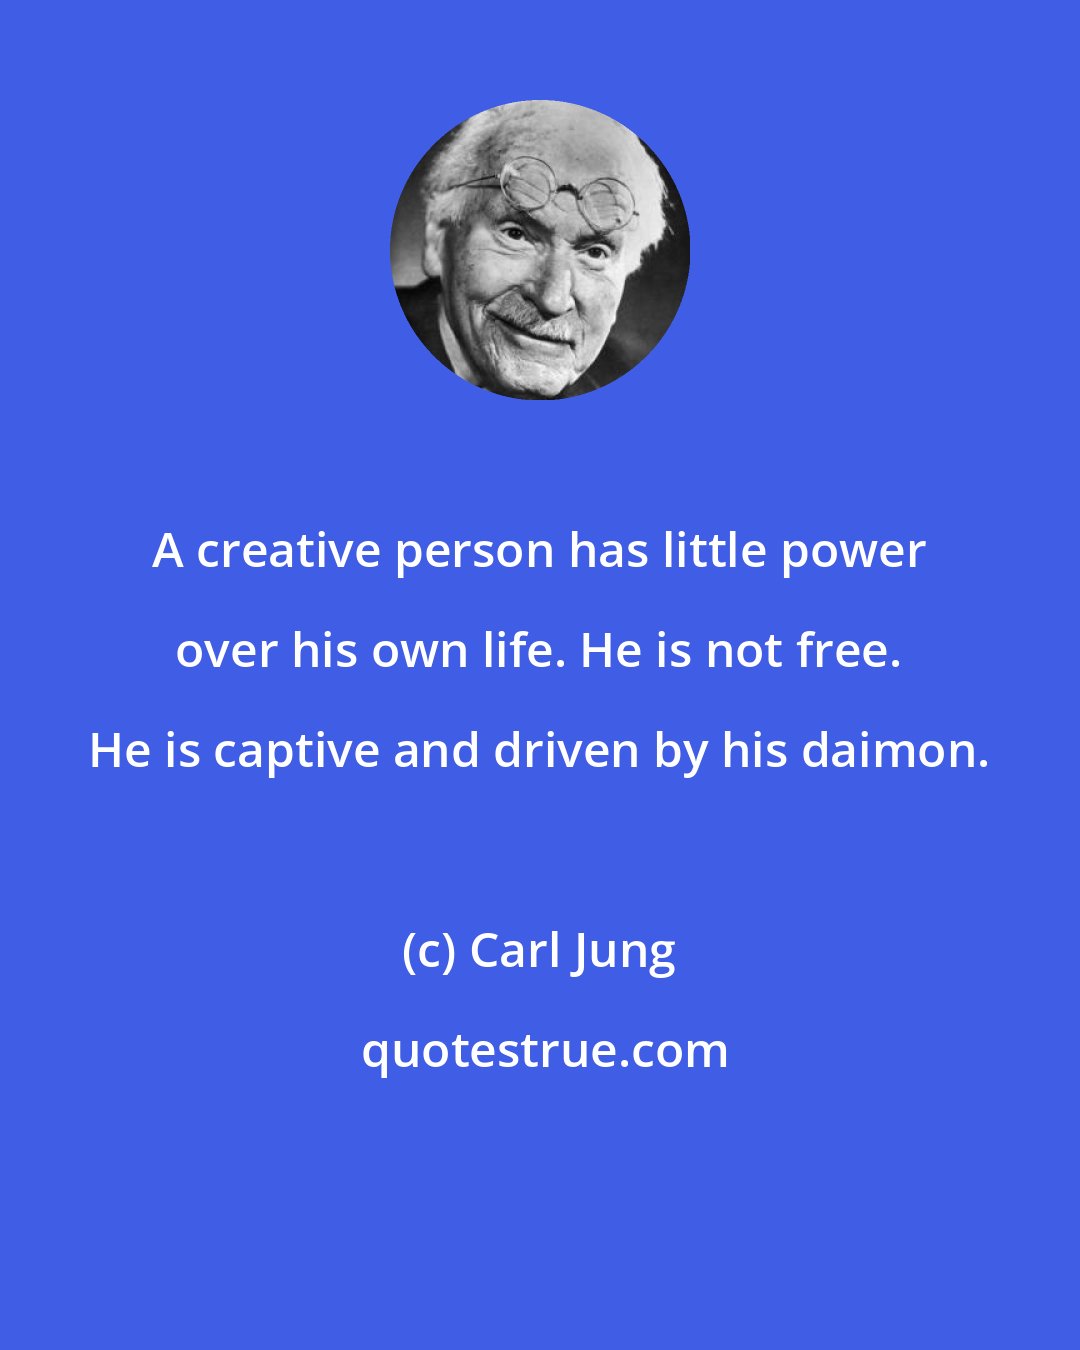 Carl Jung: A creative person has little power over his own life. He is not free. He is captive and driven by his daimon.